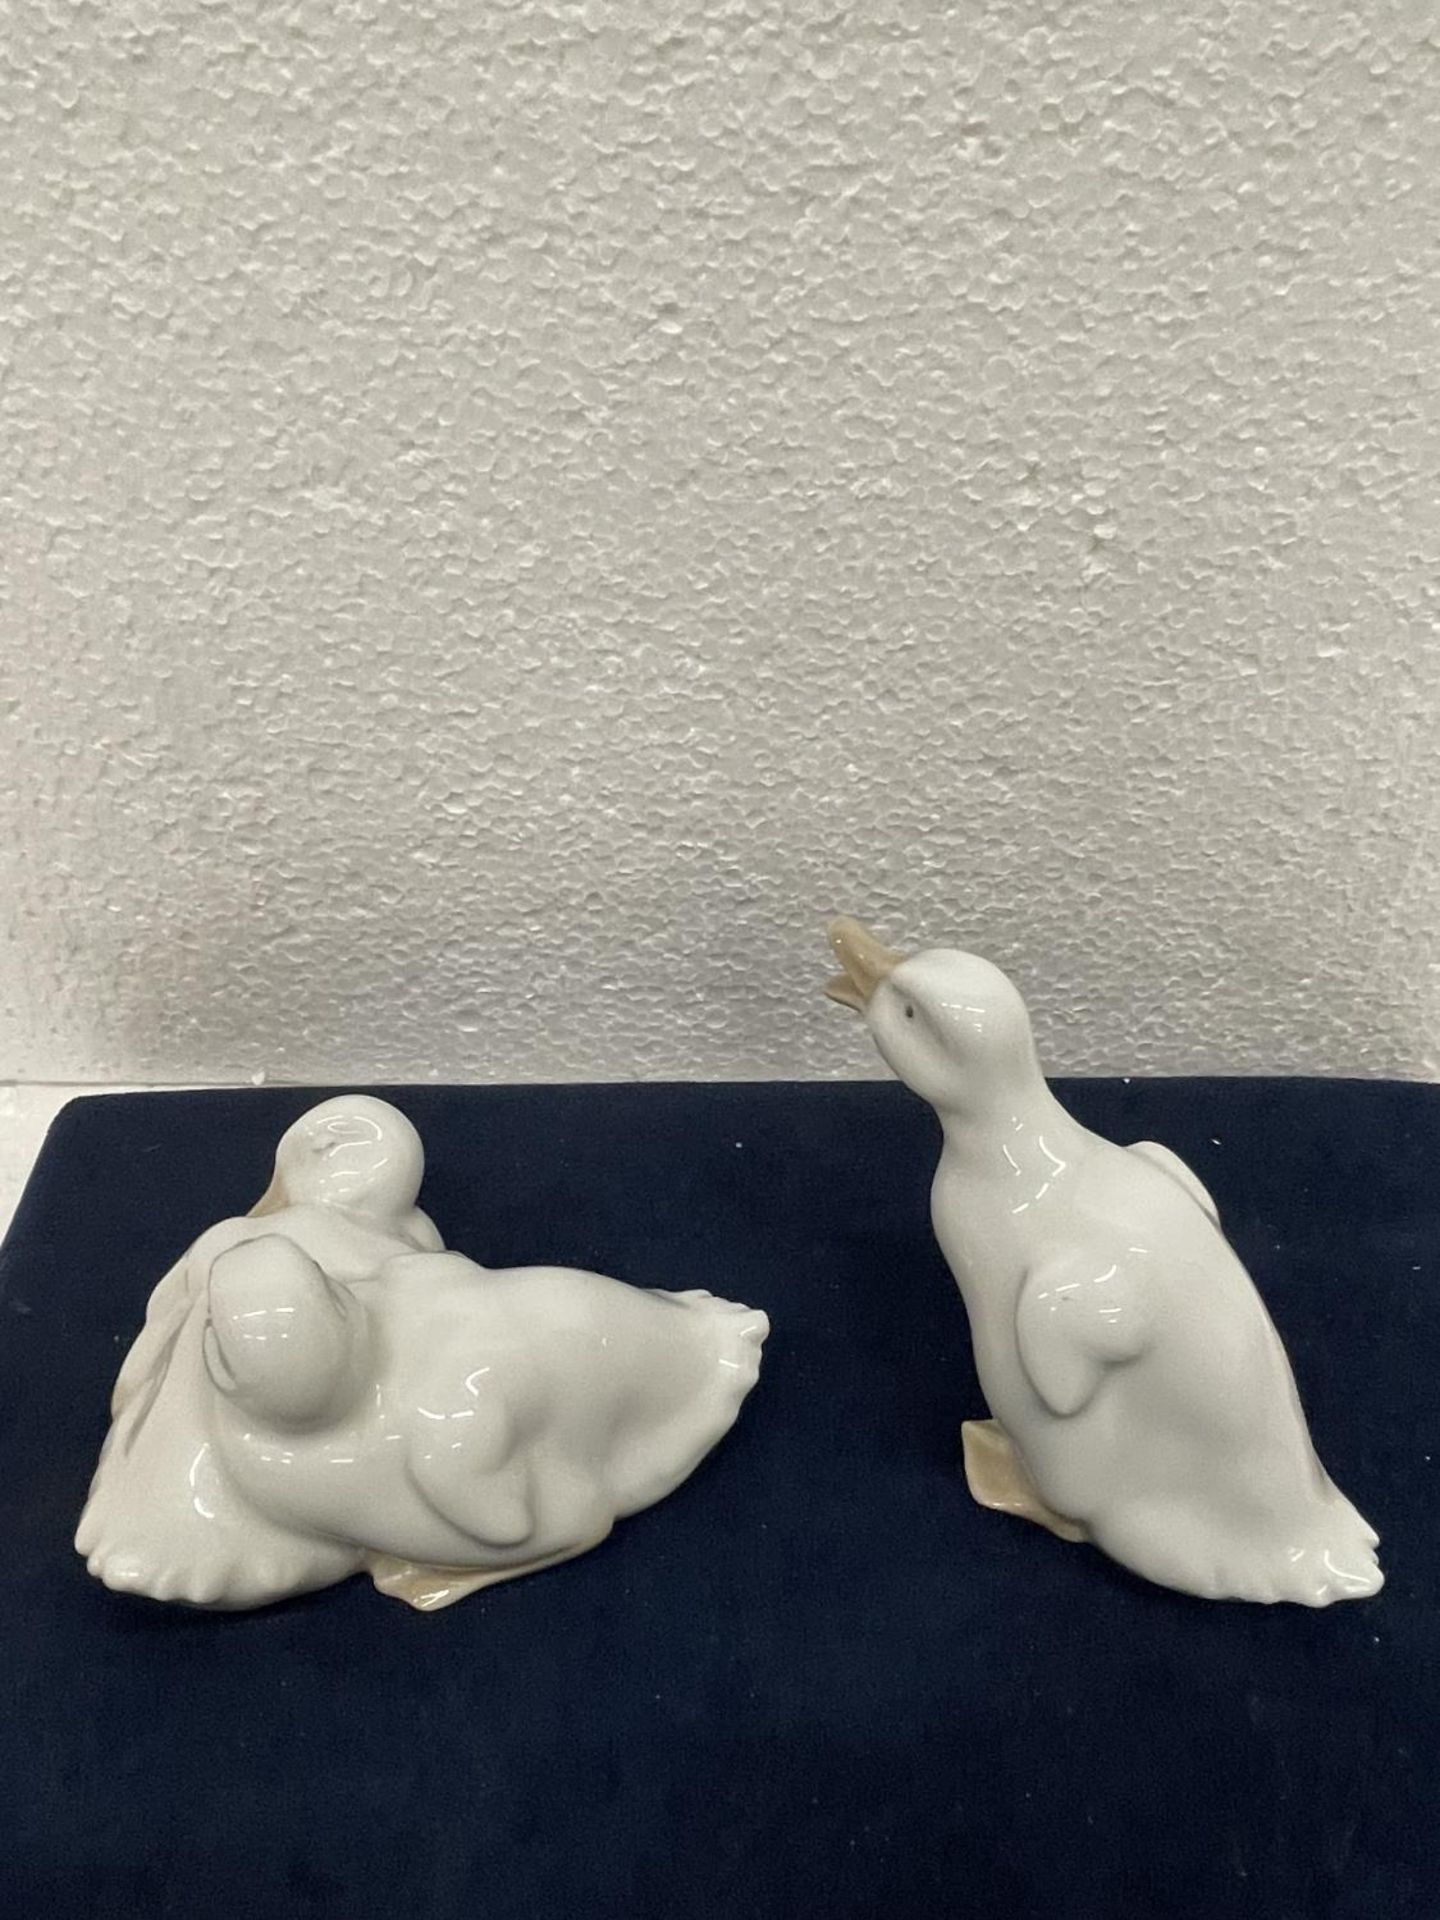 TWO NA0 DUCK ORNAMENTS - Image 3 of 3